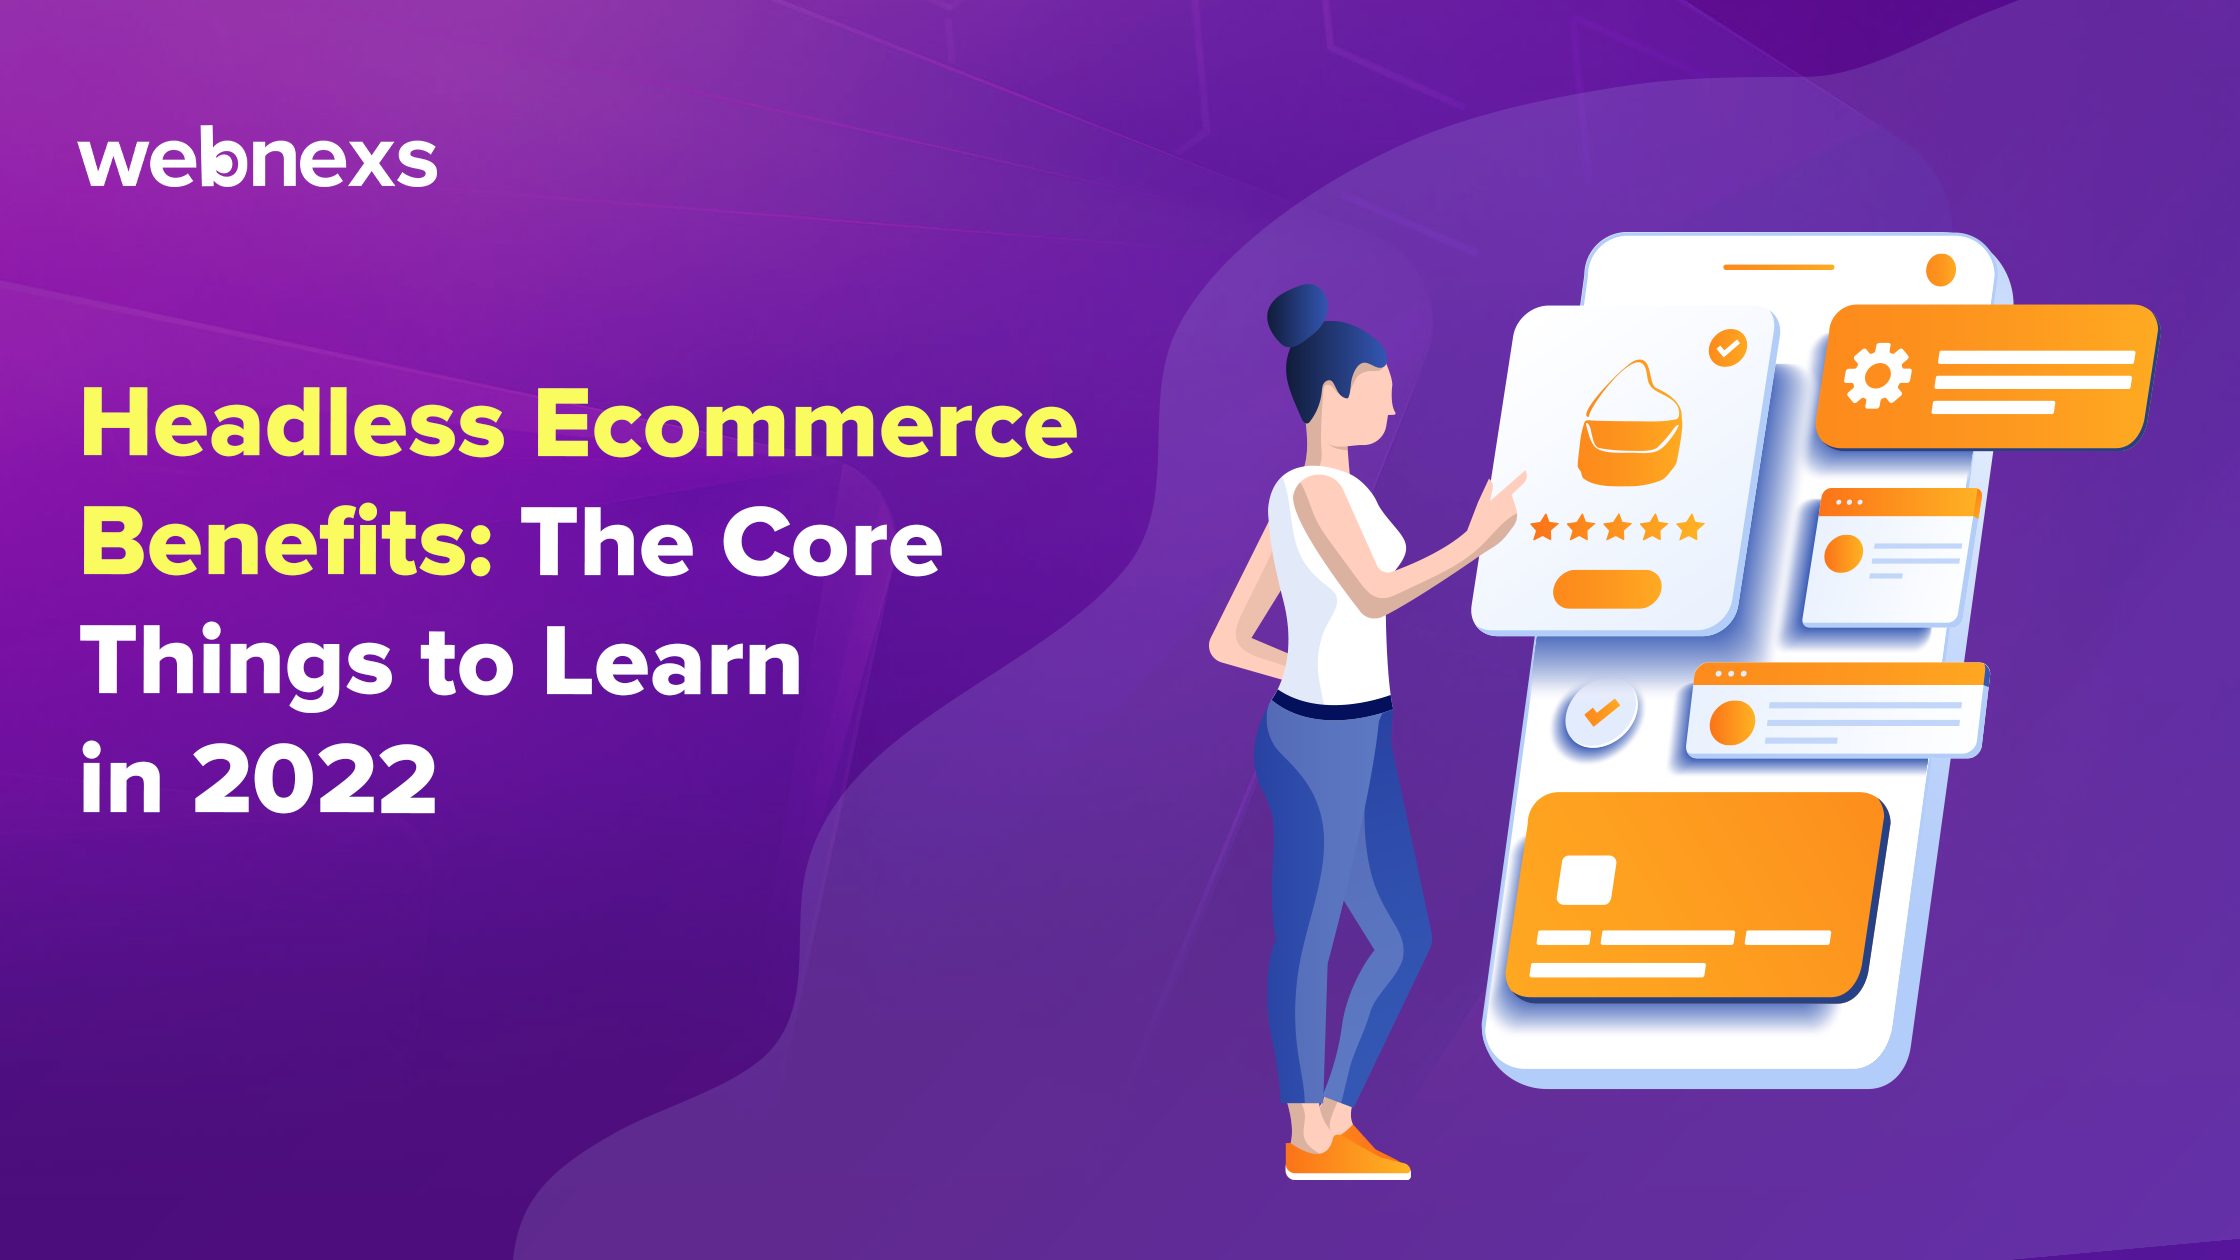 Headless Ecommerce Benefits The Core Things to Learn in 2022